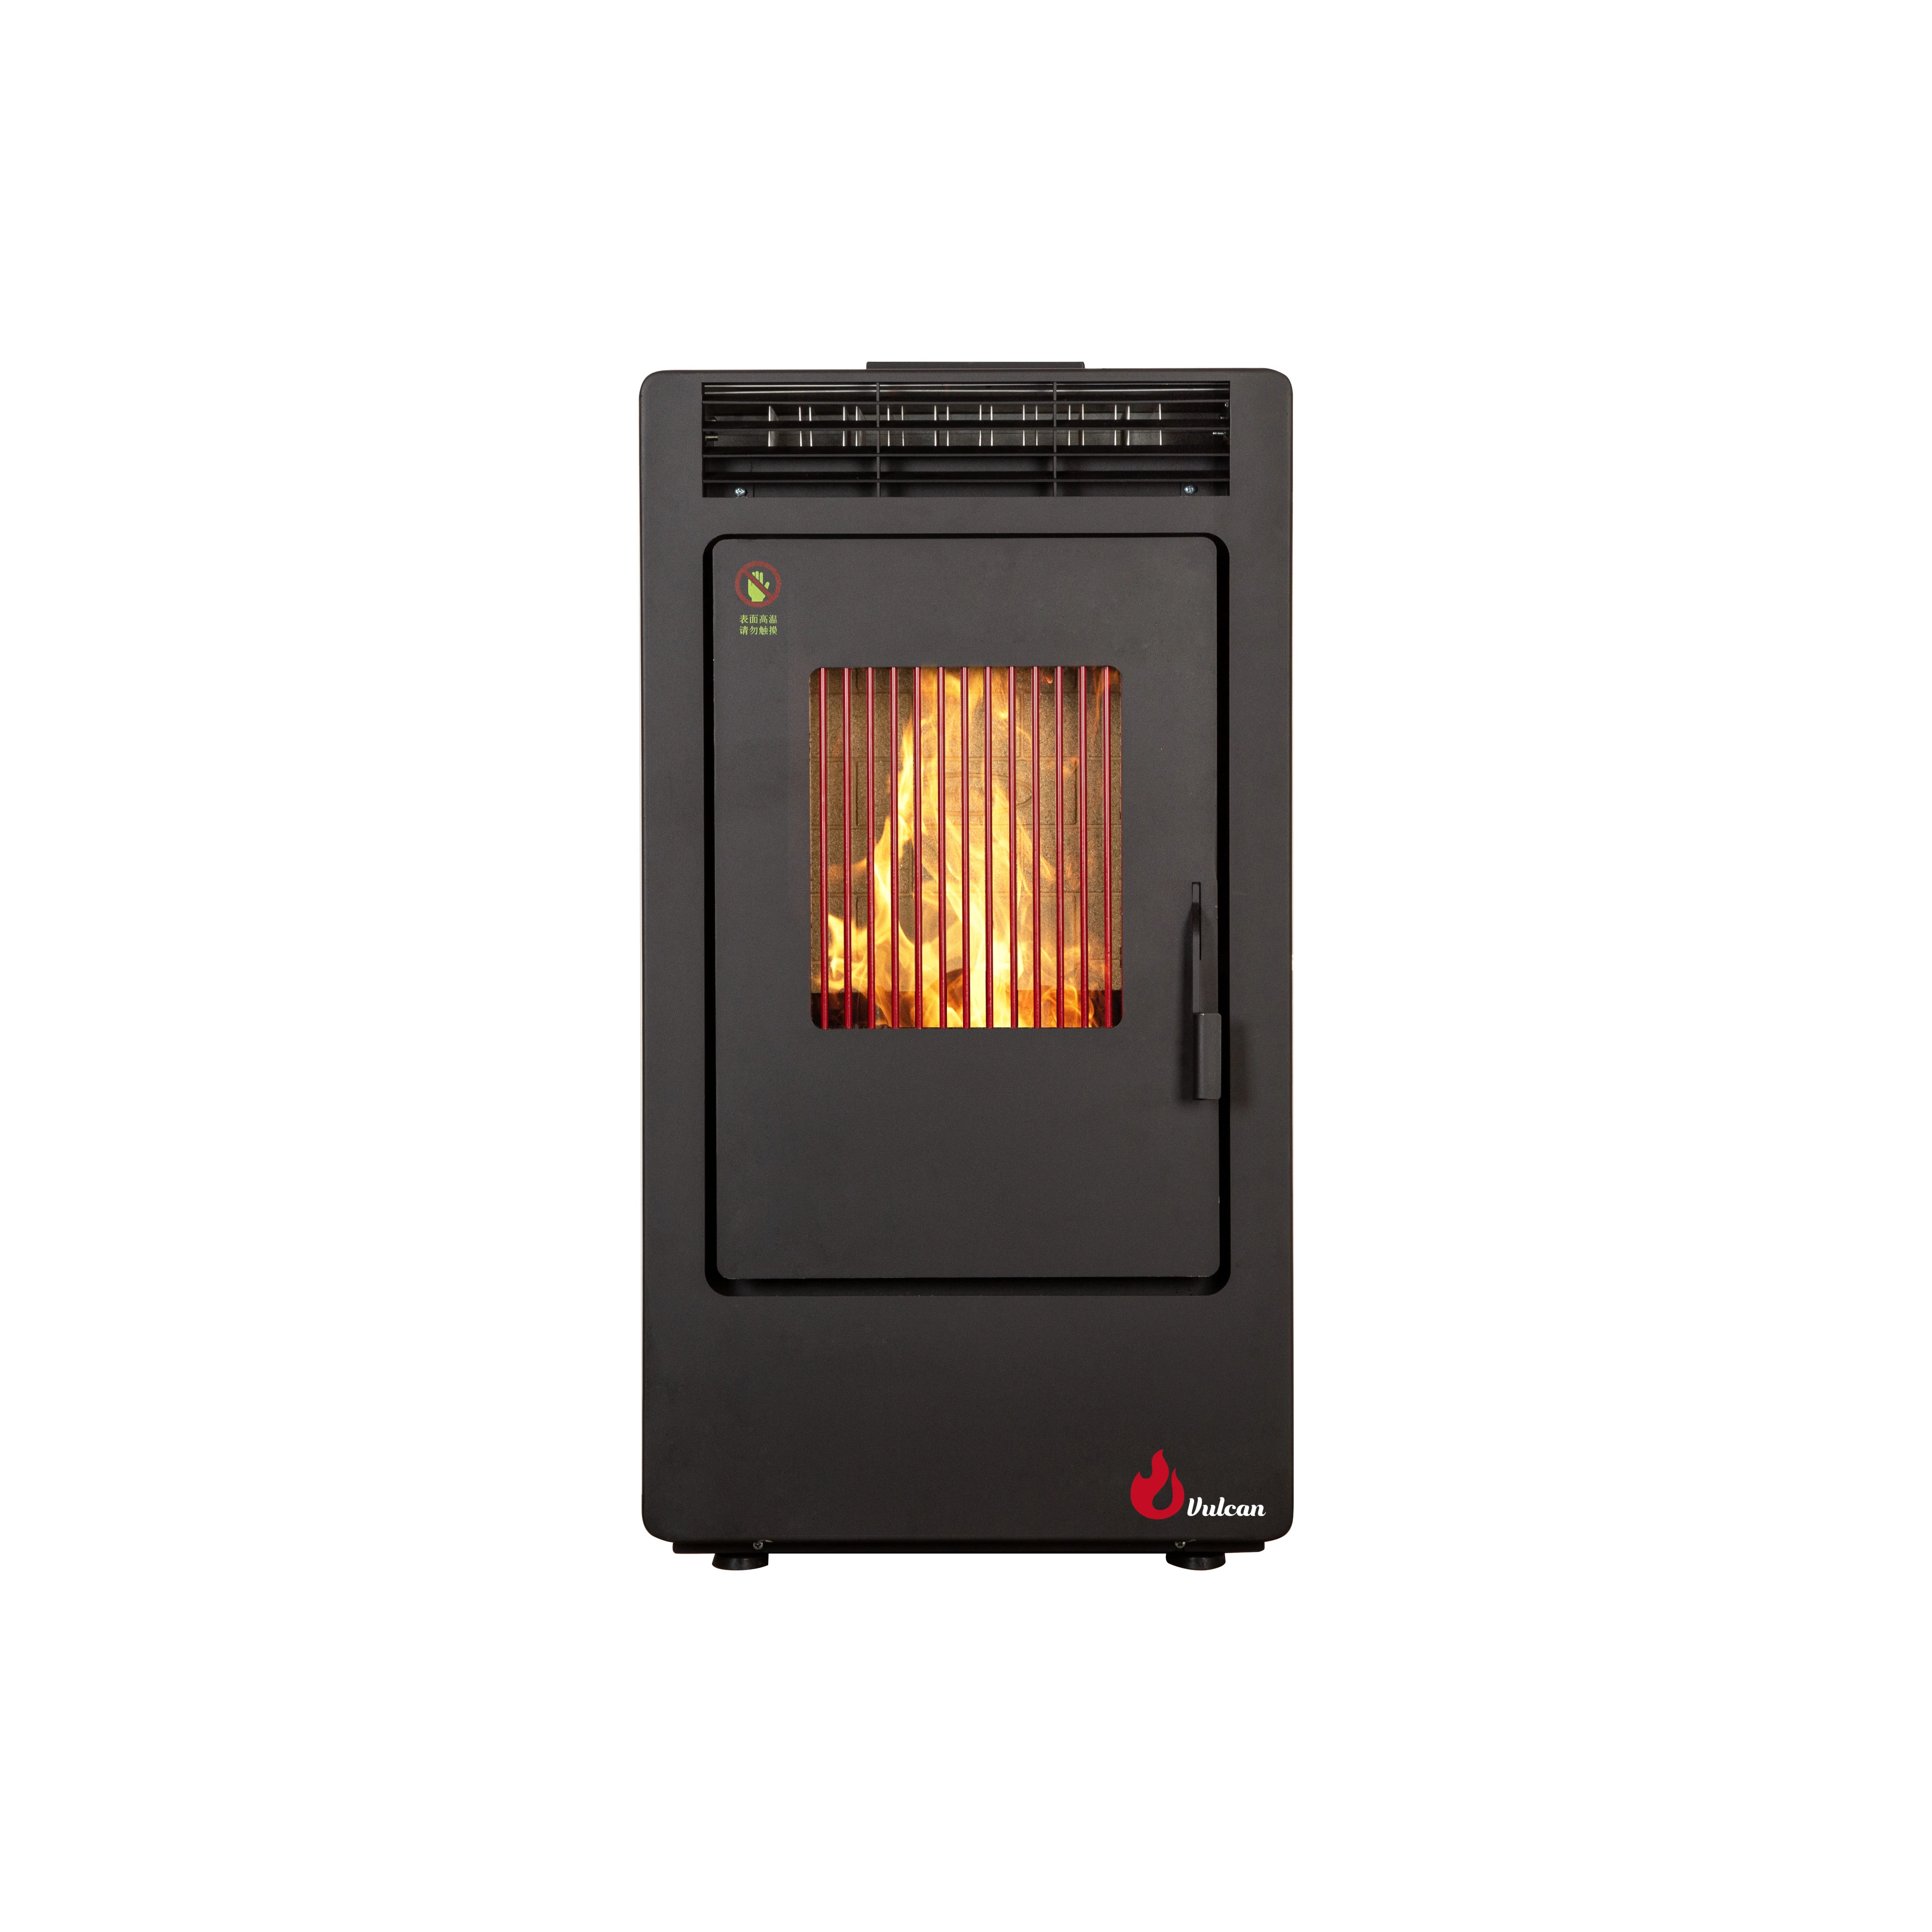 Phoenix New Design Hot Selling Cast Iron Indoor Small 10 kw  Red Pellet Stove for Heating A08